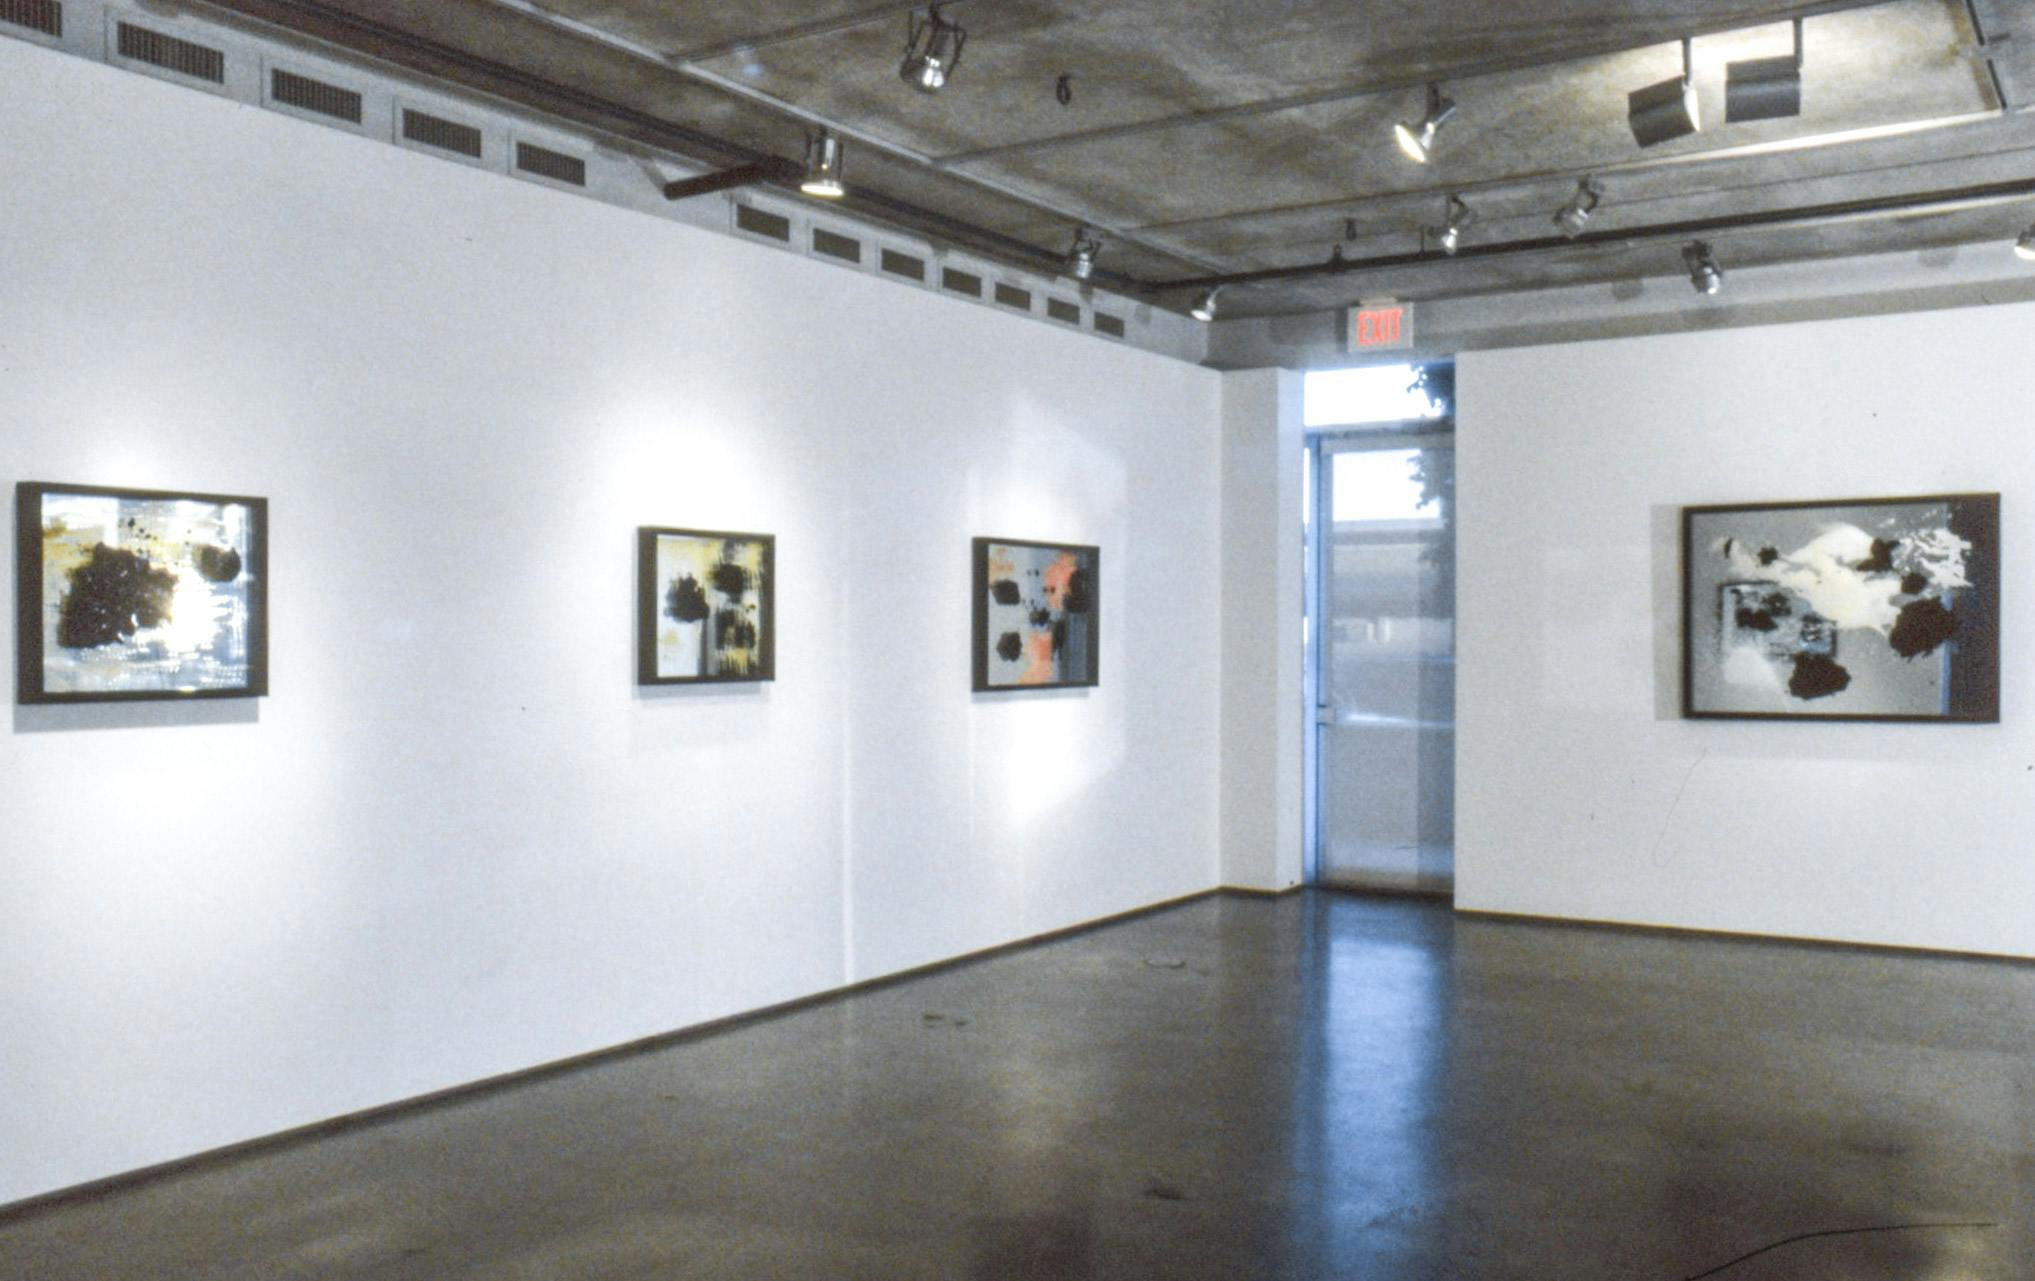 Installation image of Marina Roy’s paintings. Paintings of abstract shapes are made on the mirrors. Three paintings are mounted on the left wall and a larger painting on the far wall. 